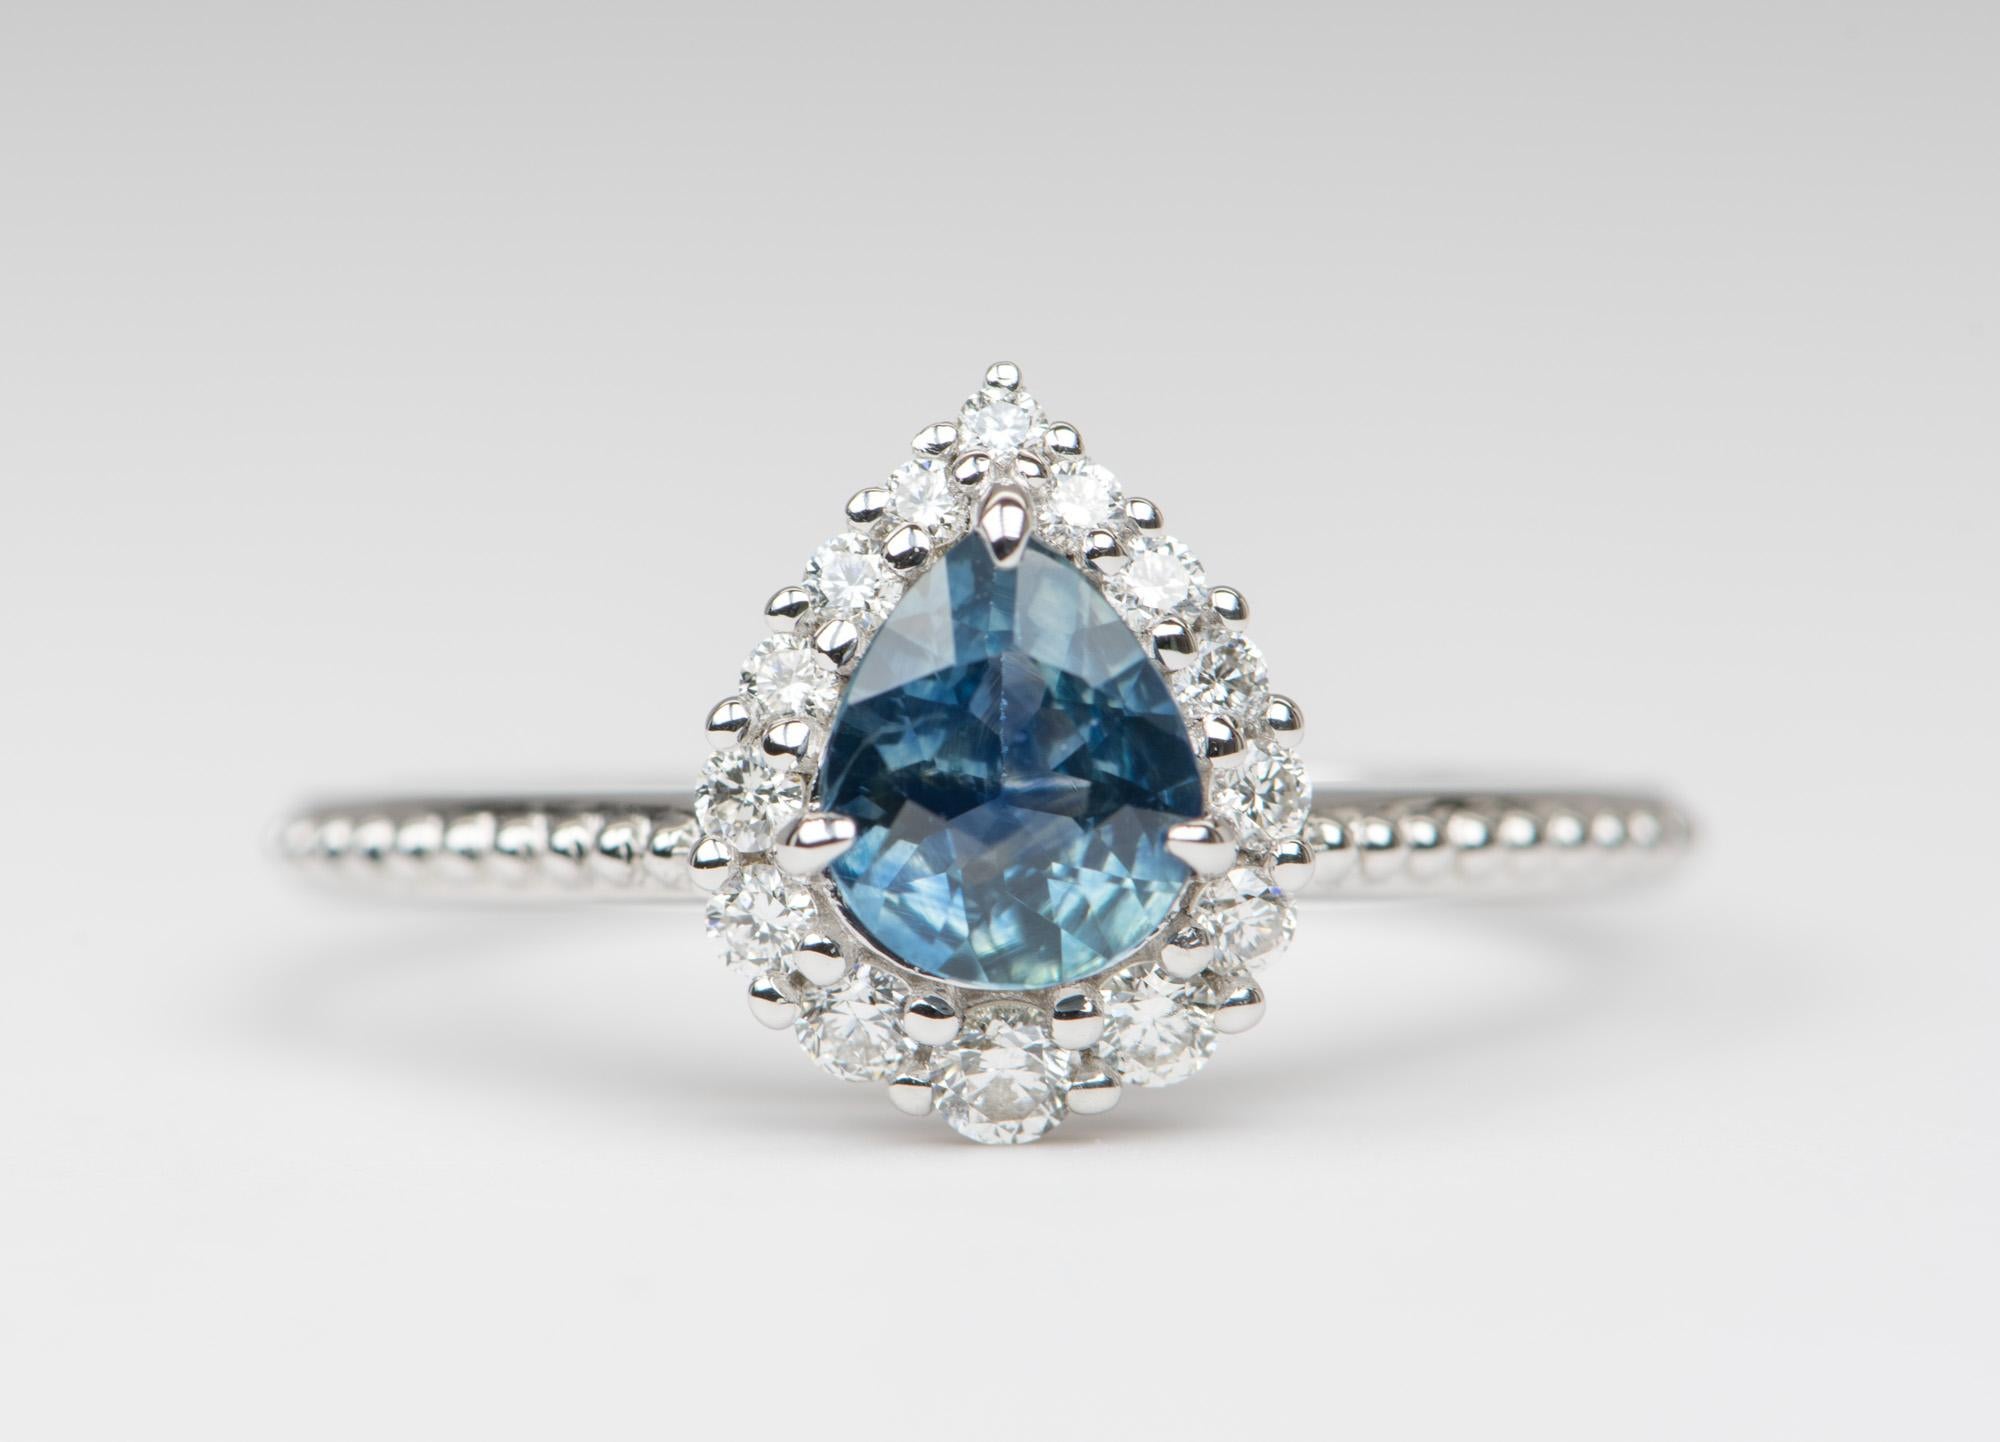 ♥  This is a solid 14K white gold ring set with a beautiful teal blue pear-shaped Montana sapphire in the center, flanked by a halo of gradual-sized sparkly diamonds. 
♥  The overall setting measures 9mm in width, 11.1mm in length, and sits 6.1mm